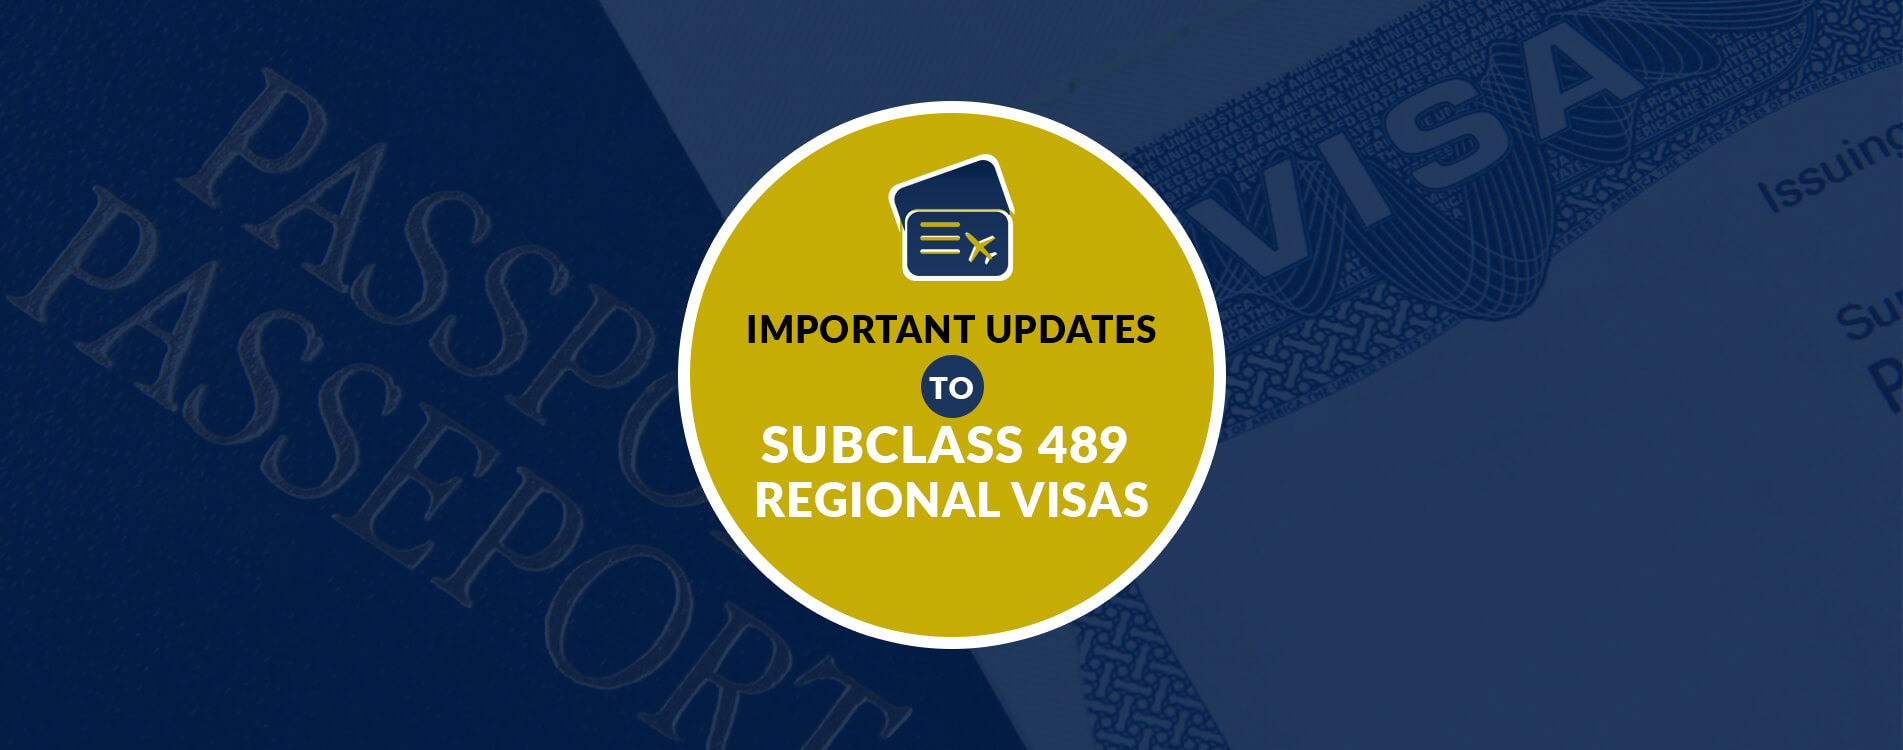 Important Updates to Subclass 489 Regional Visas